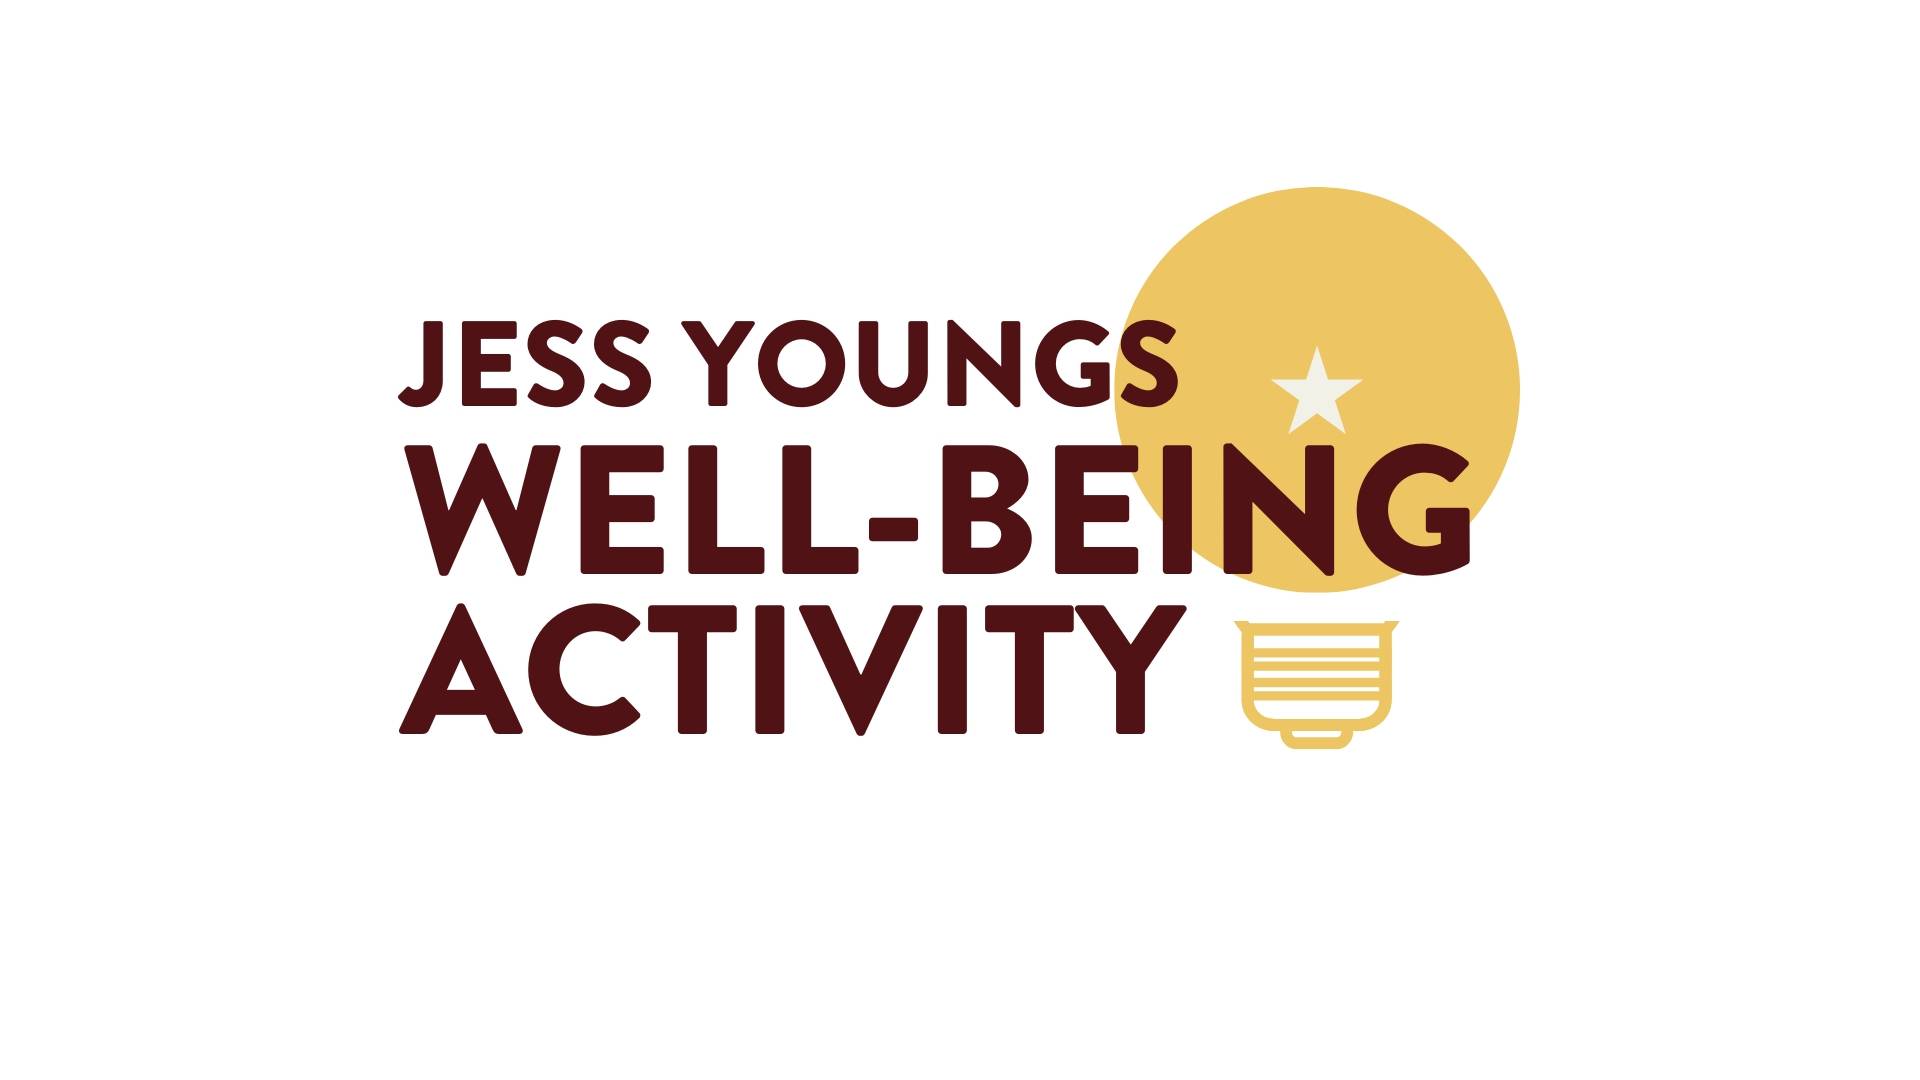 Well-being activity